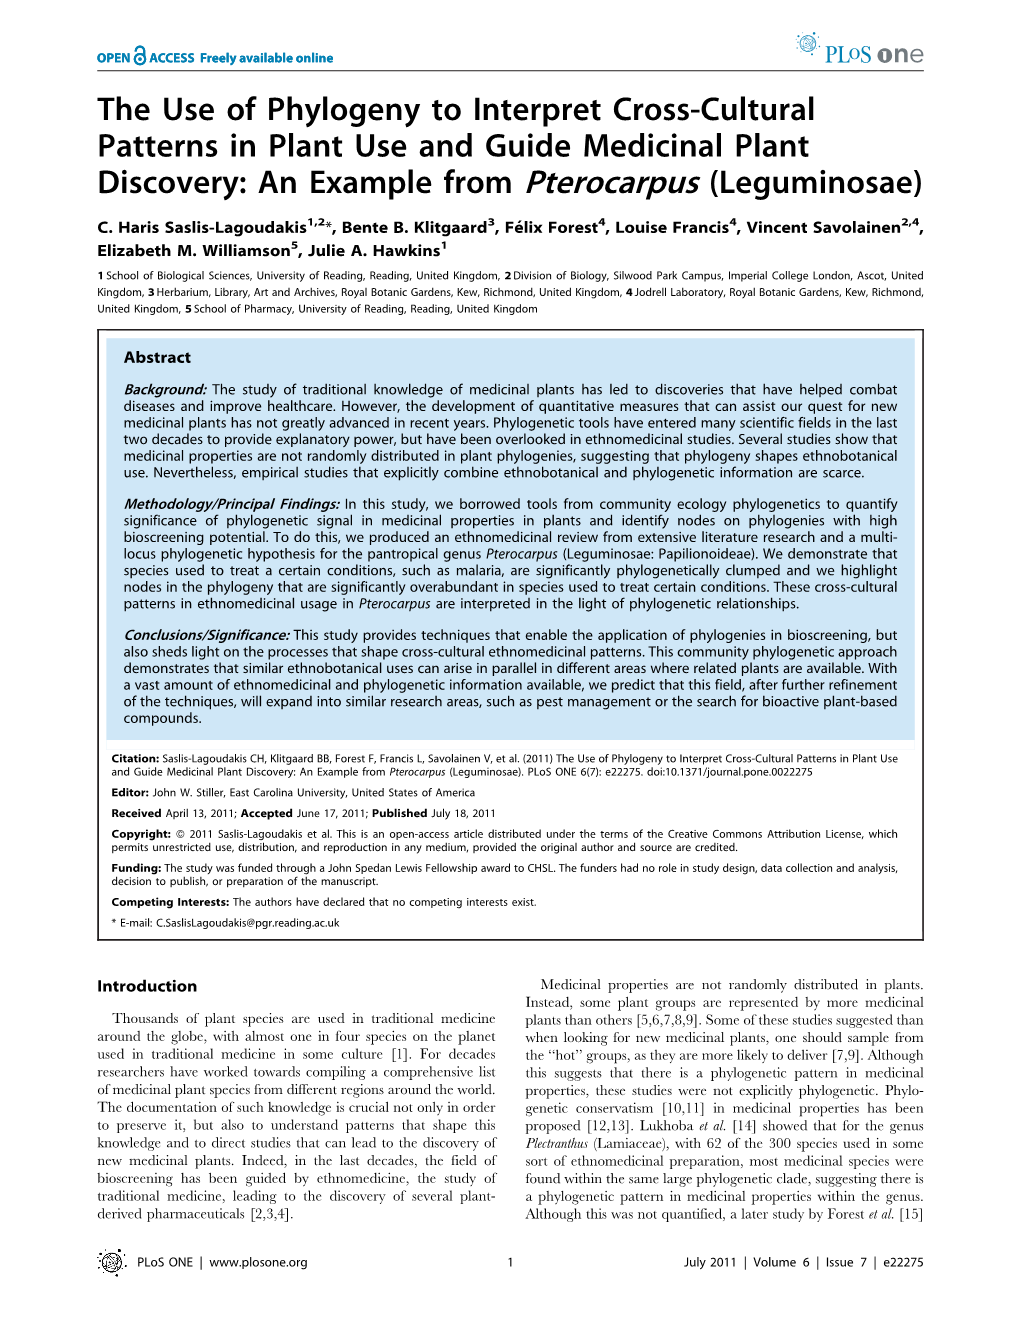 The Use of Phylogeny to Interpret Cross-Cultural Patterns in Plant Use and Guide Medicinal Plant Discovery: an Example from Pterocarpus (Leguminosae)